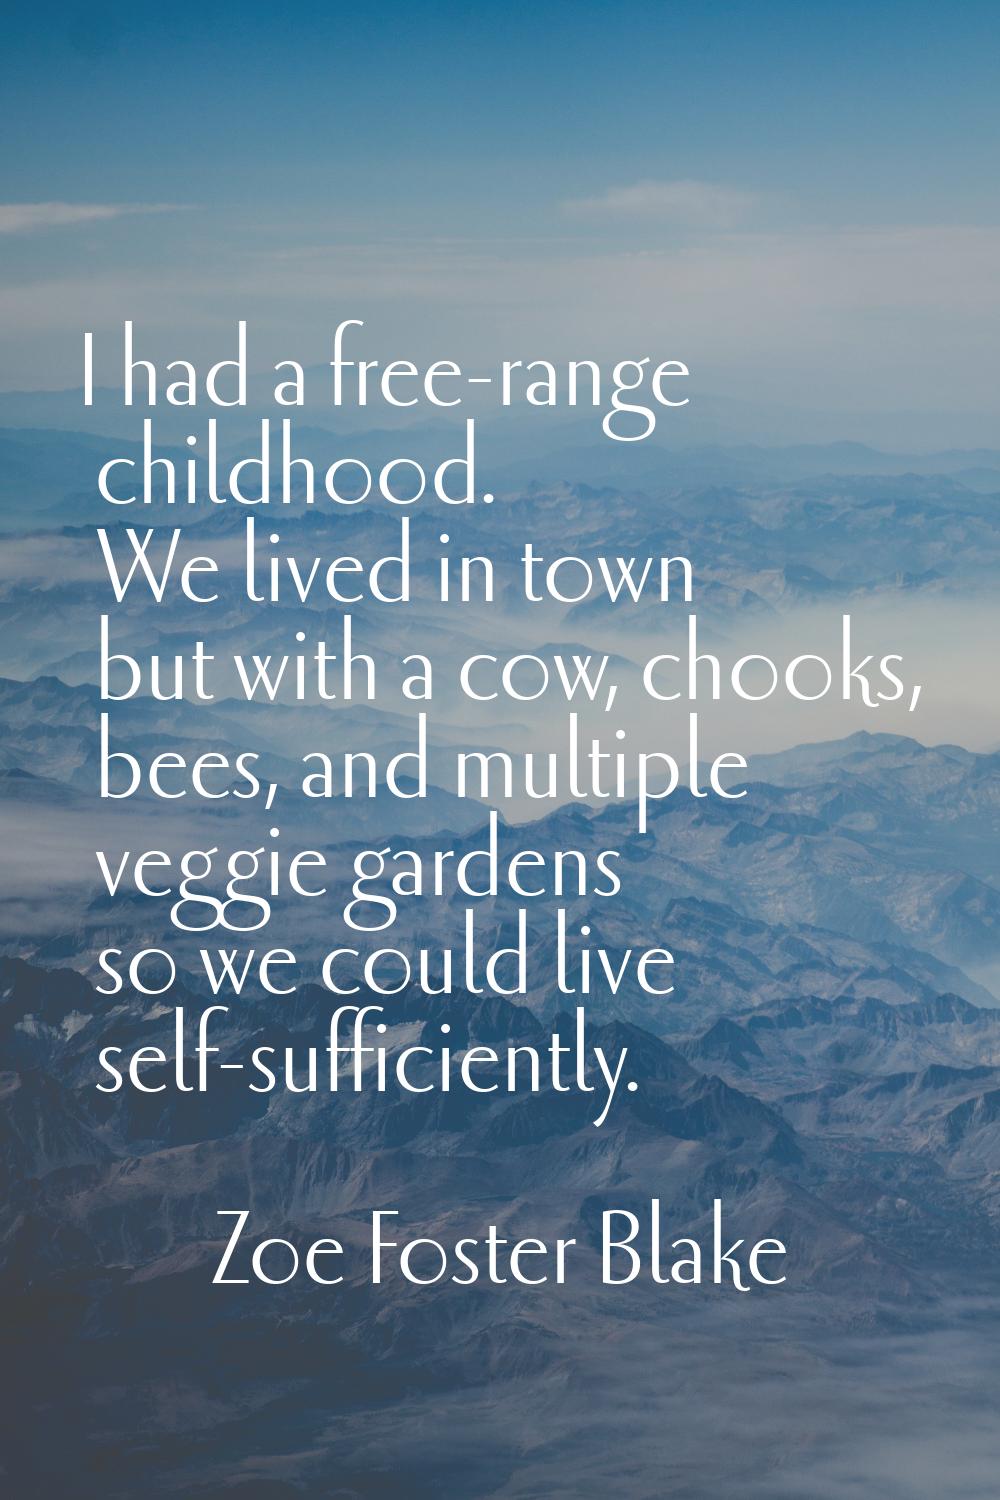 I had a free-range childhood. We lived in town but with a cow, chooks, bees, and multiple veggie ga